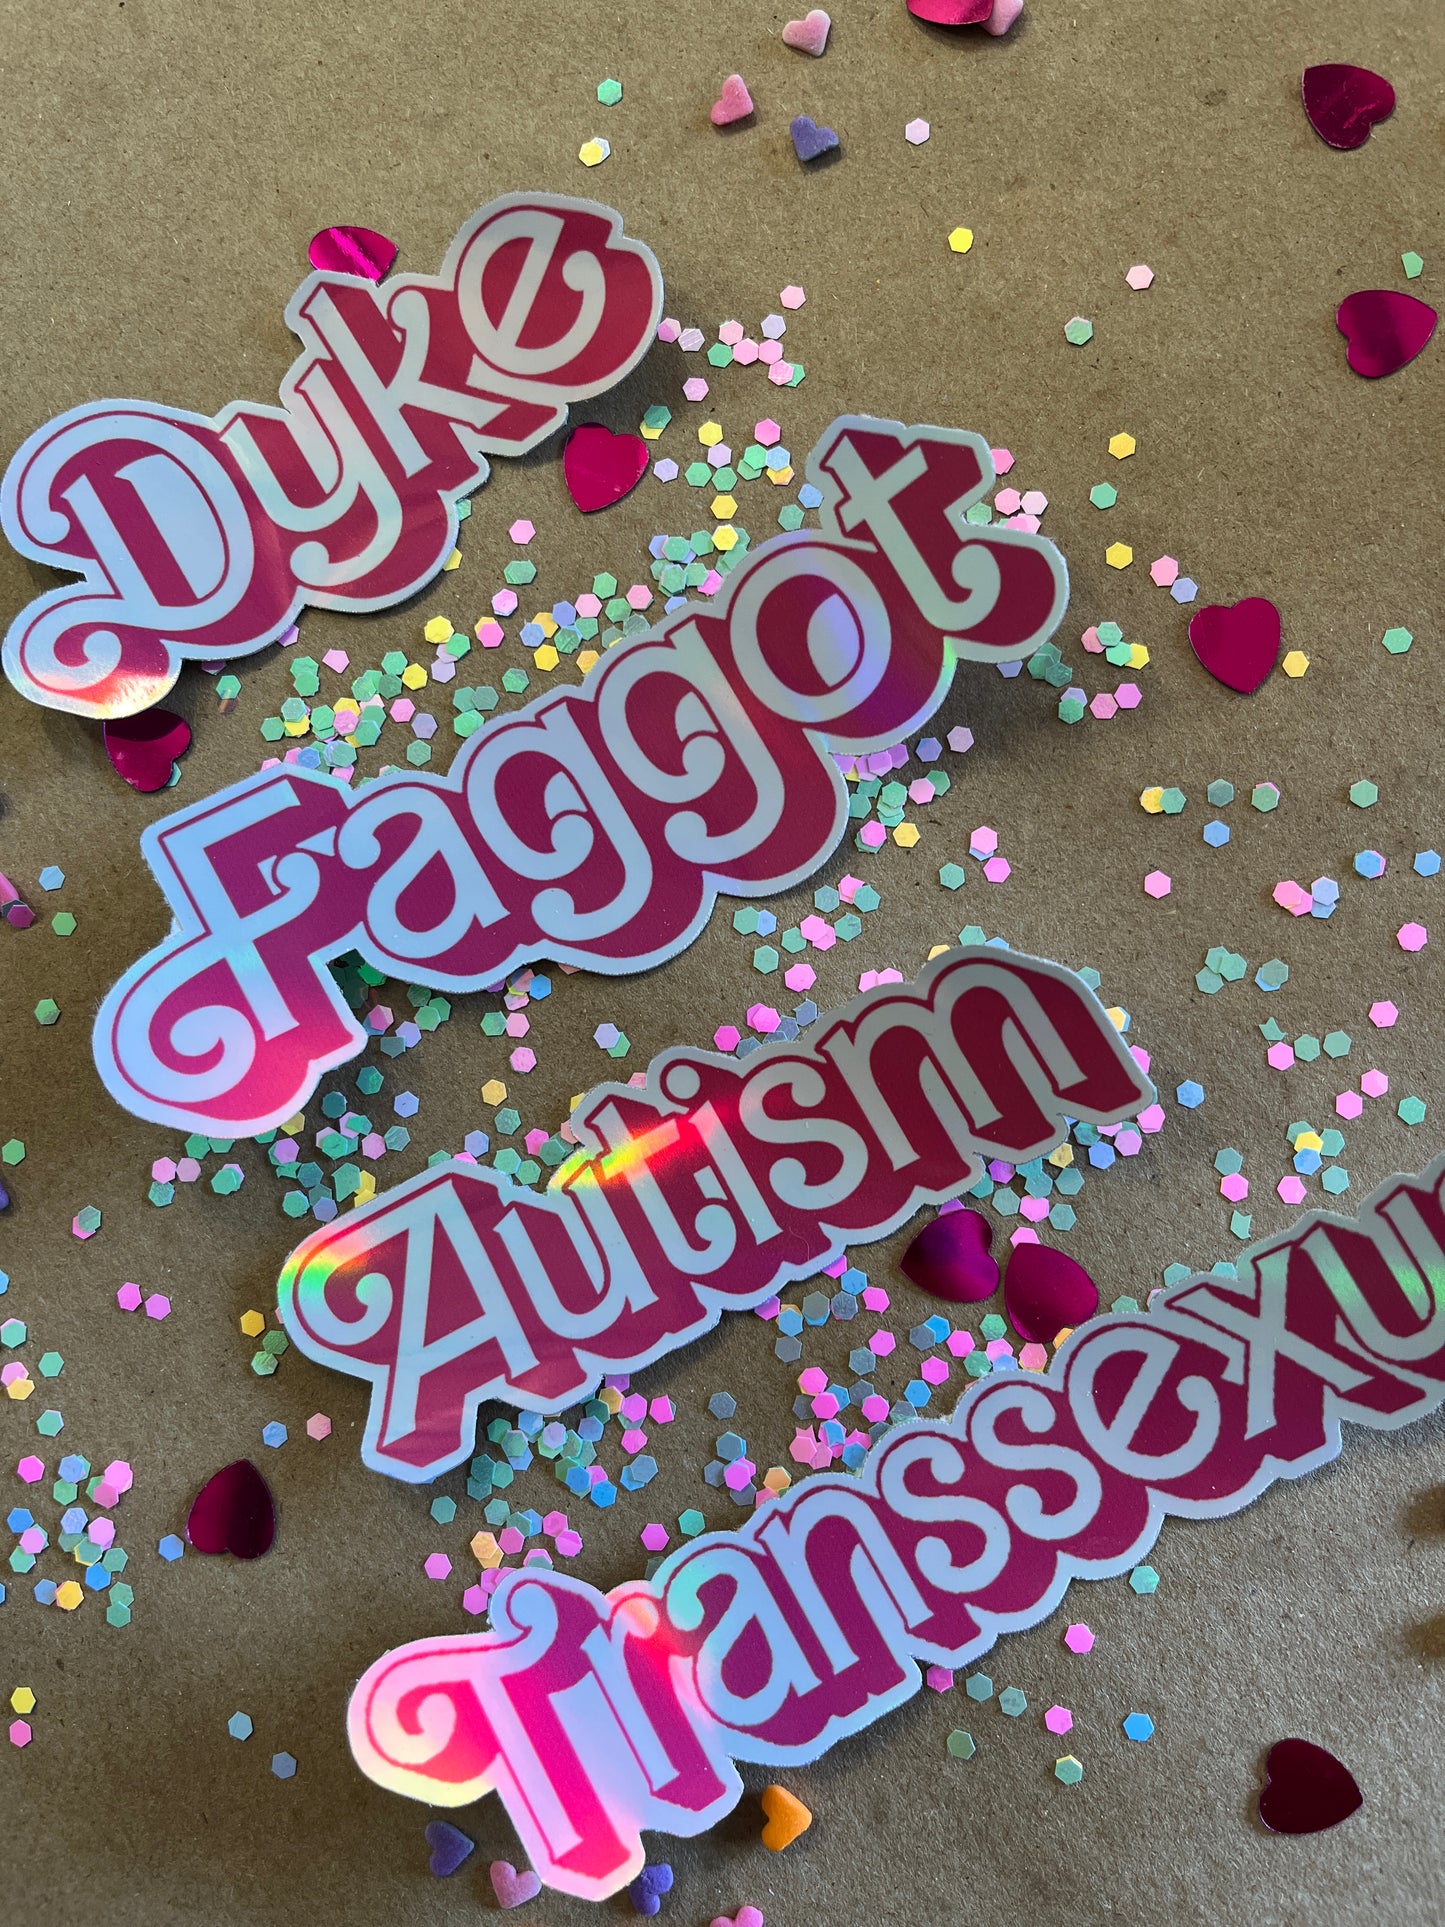 Holographic Text Stickers - FAGGOT, DYKE, TRANSSEXUAL, AUTISM